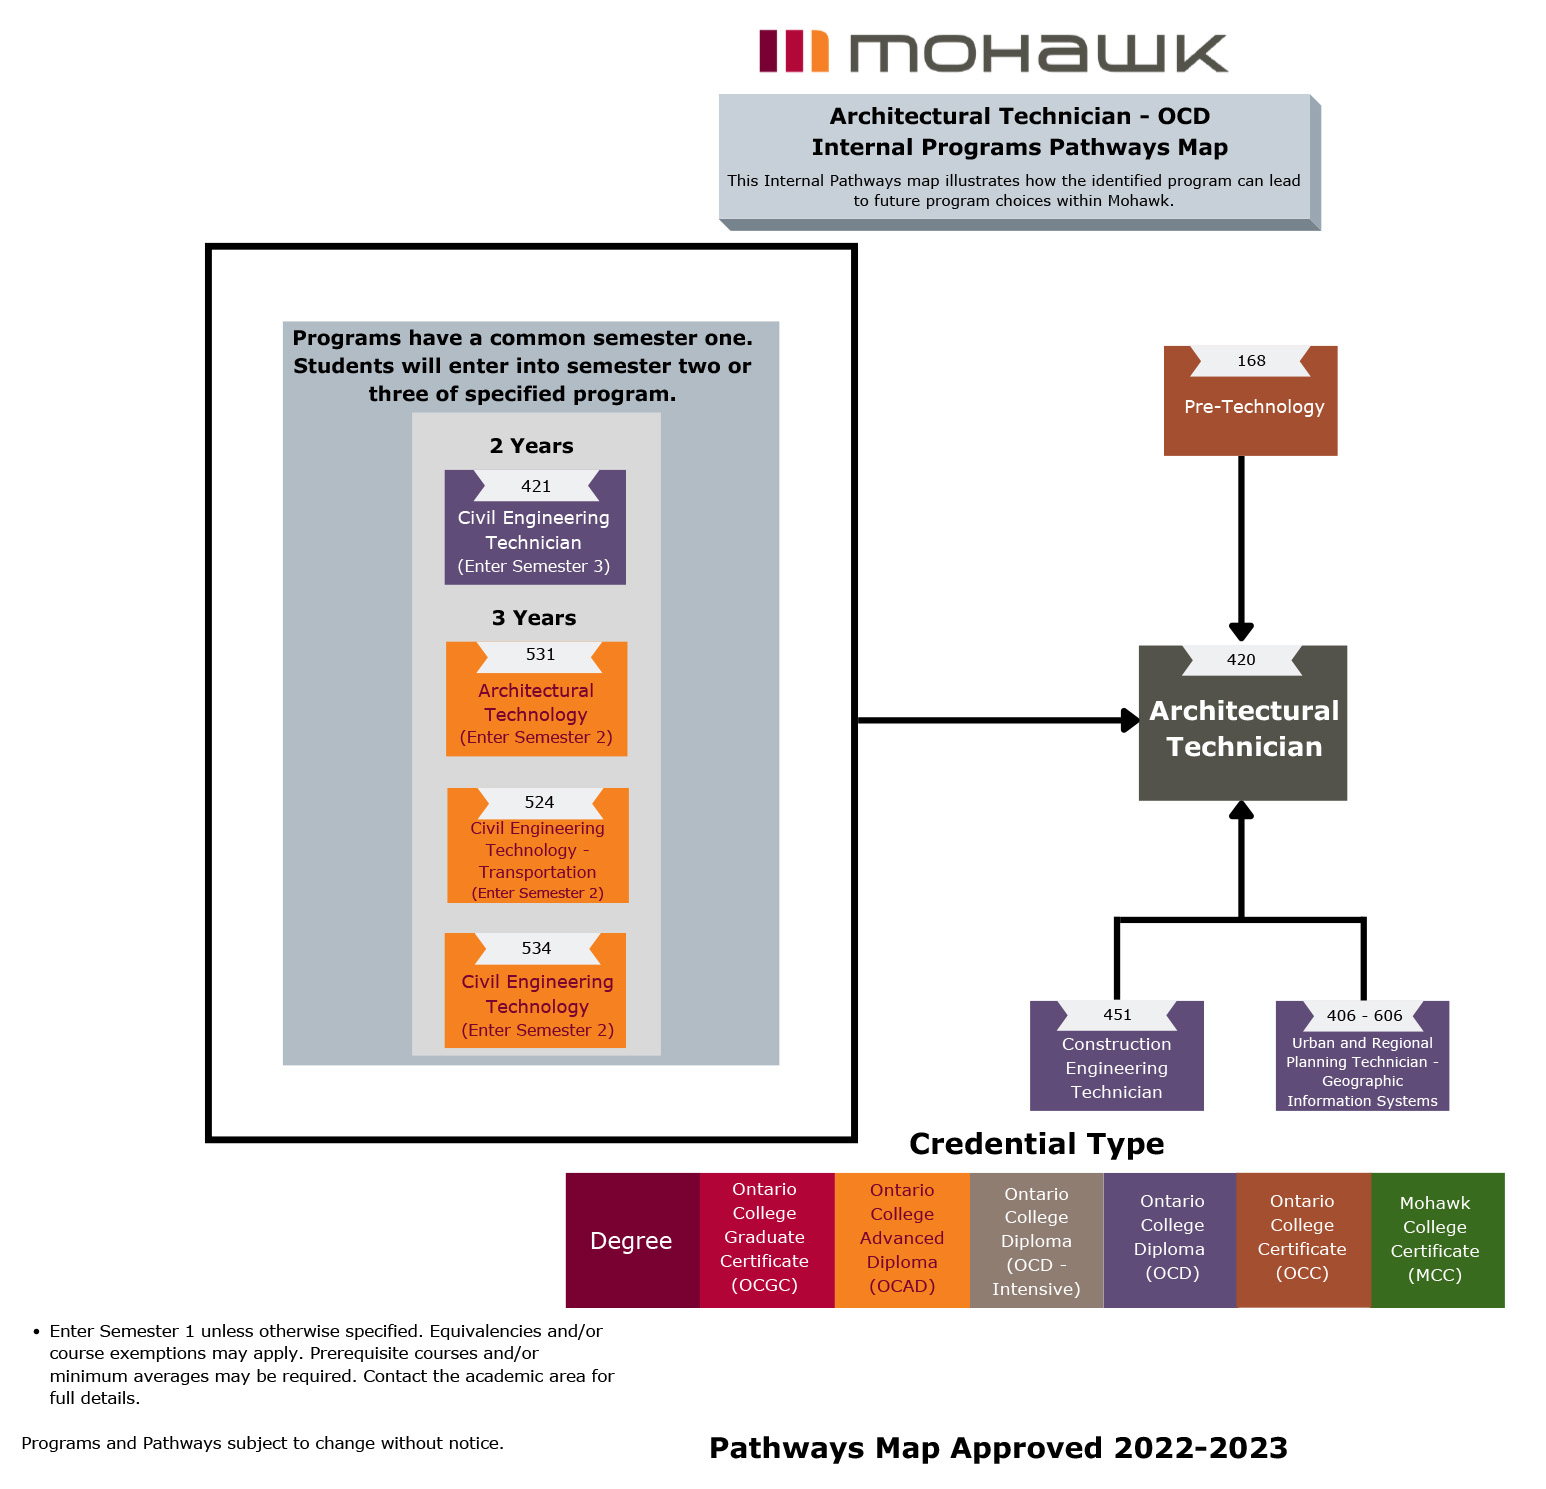 Architectural Technician pathways map